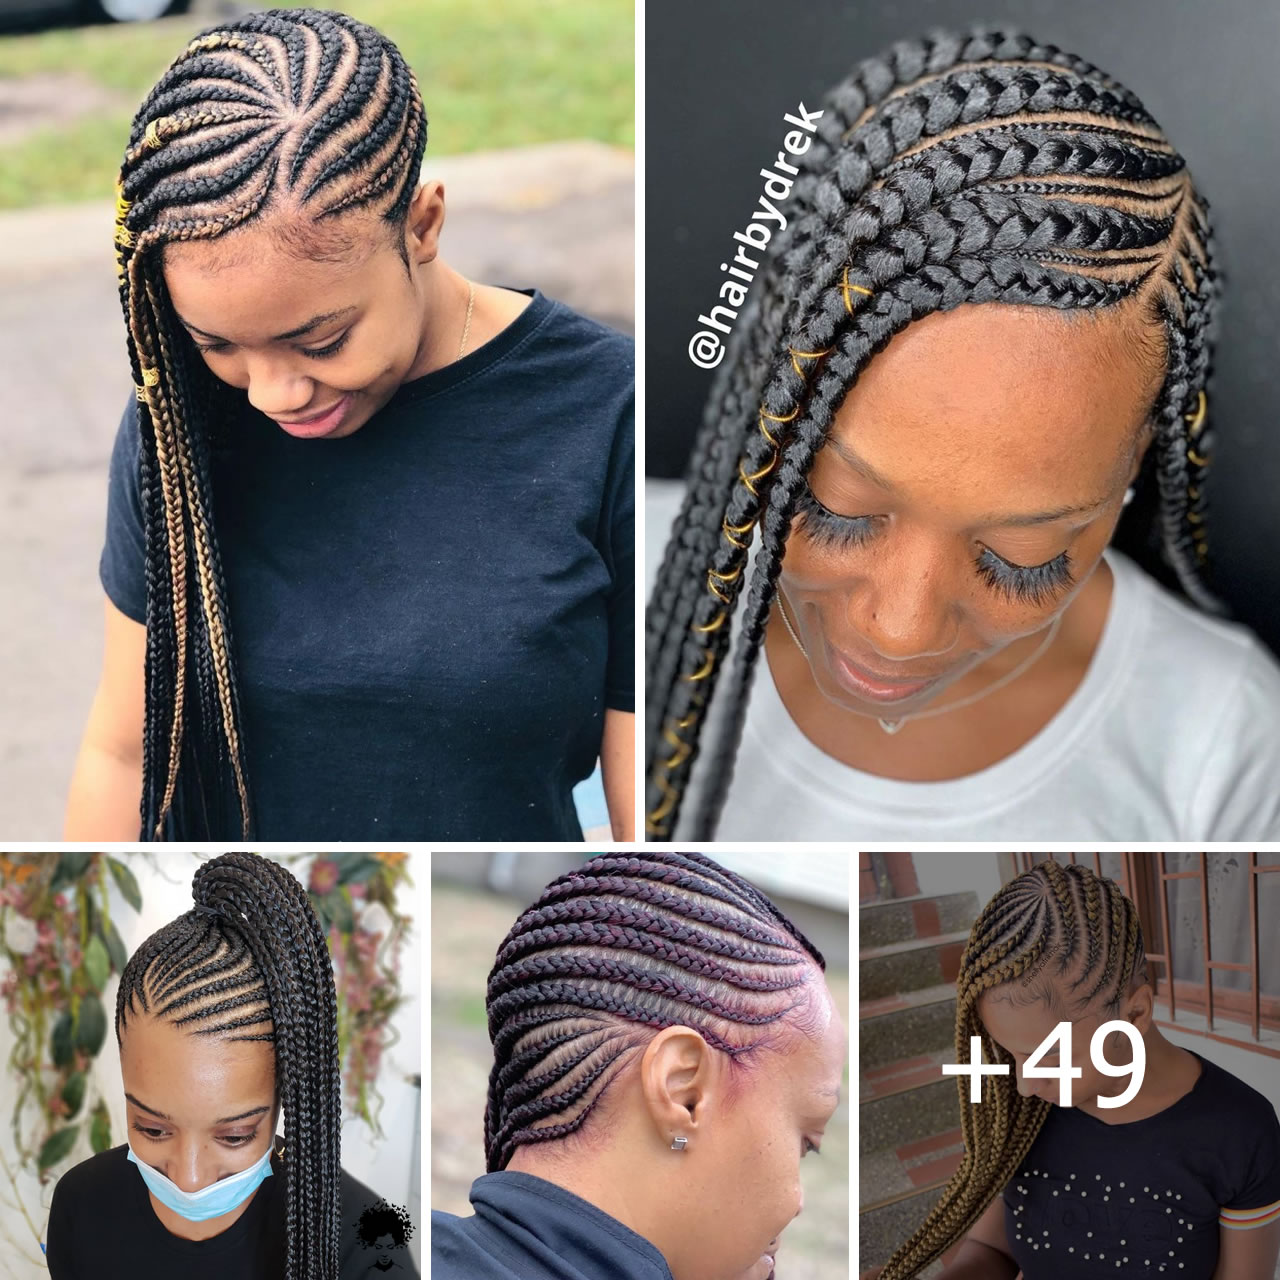 49 Trendy Lemonade Braids Ideas for All Tastes and Ages